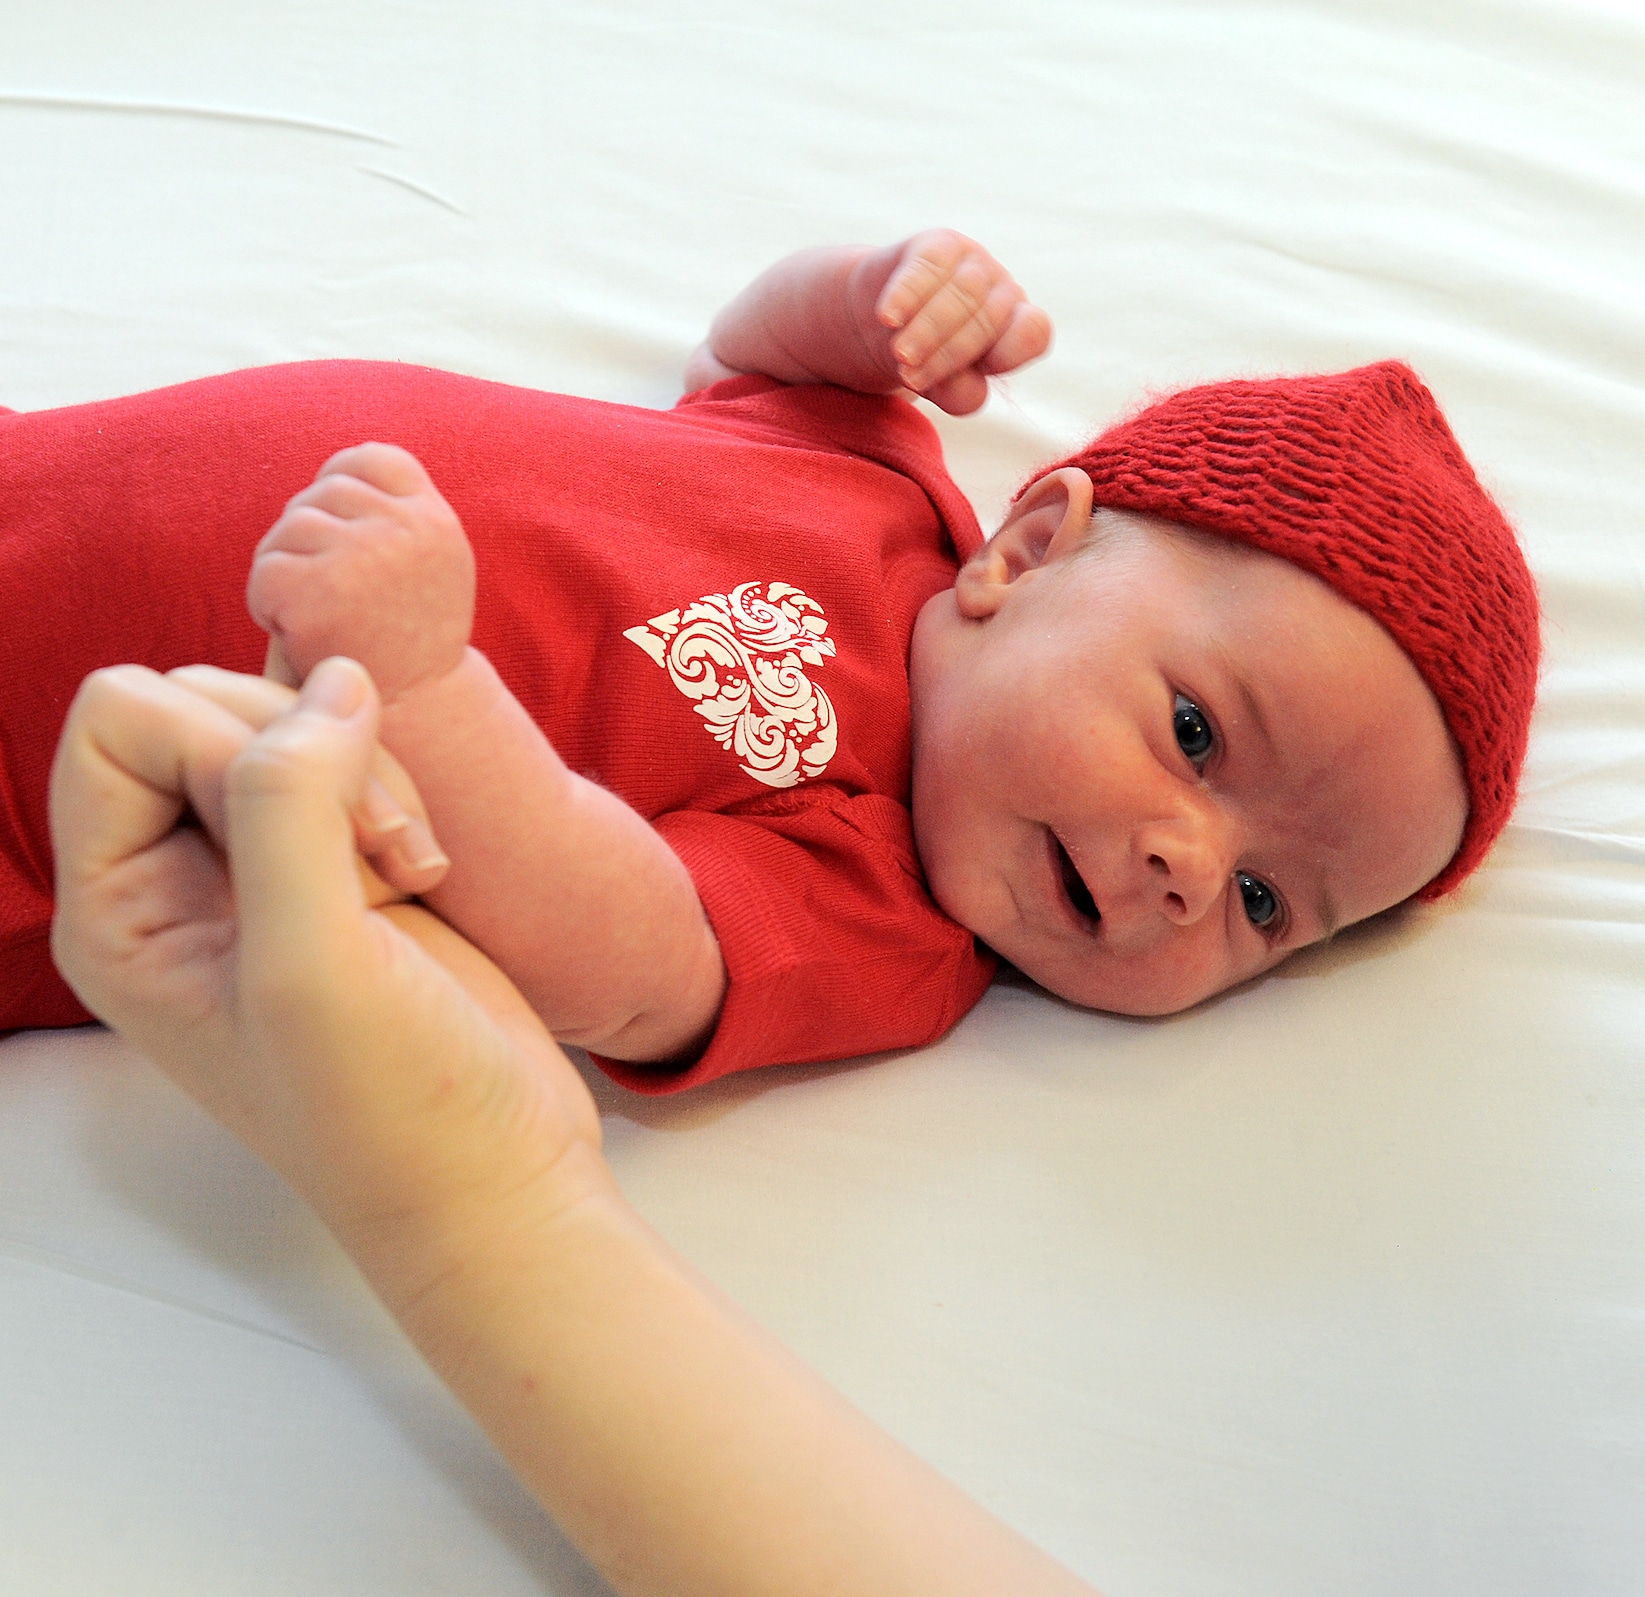 Huntington Hospital Babies "Go Red" for Heart Month